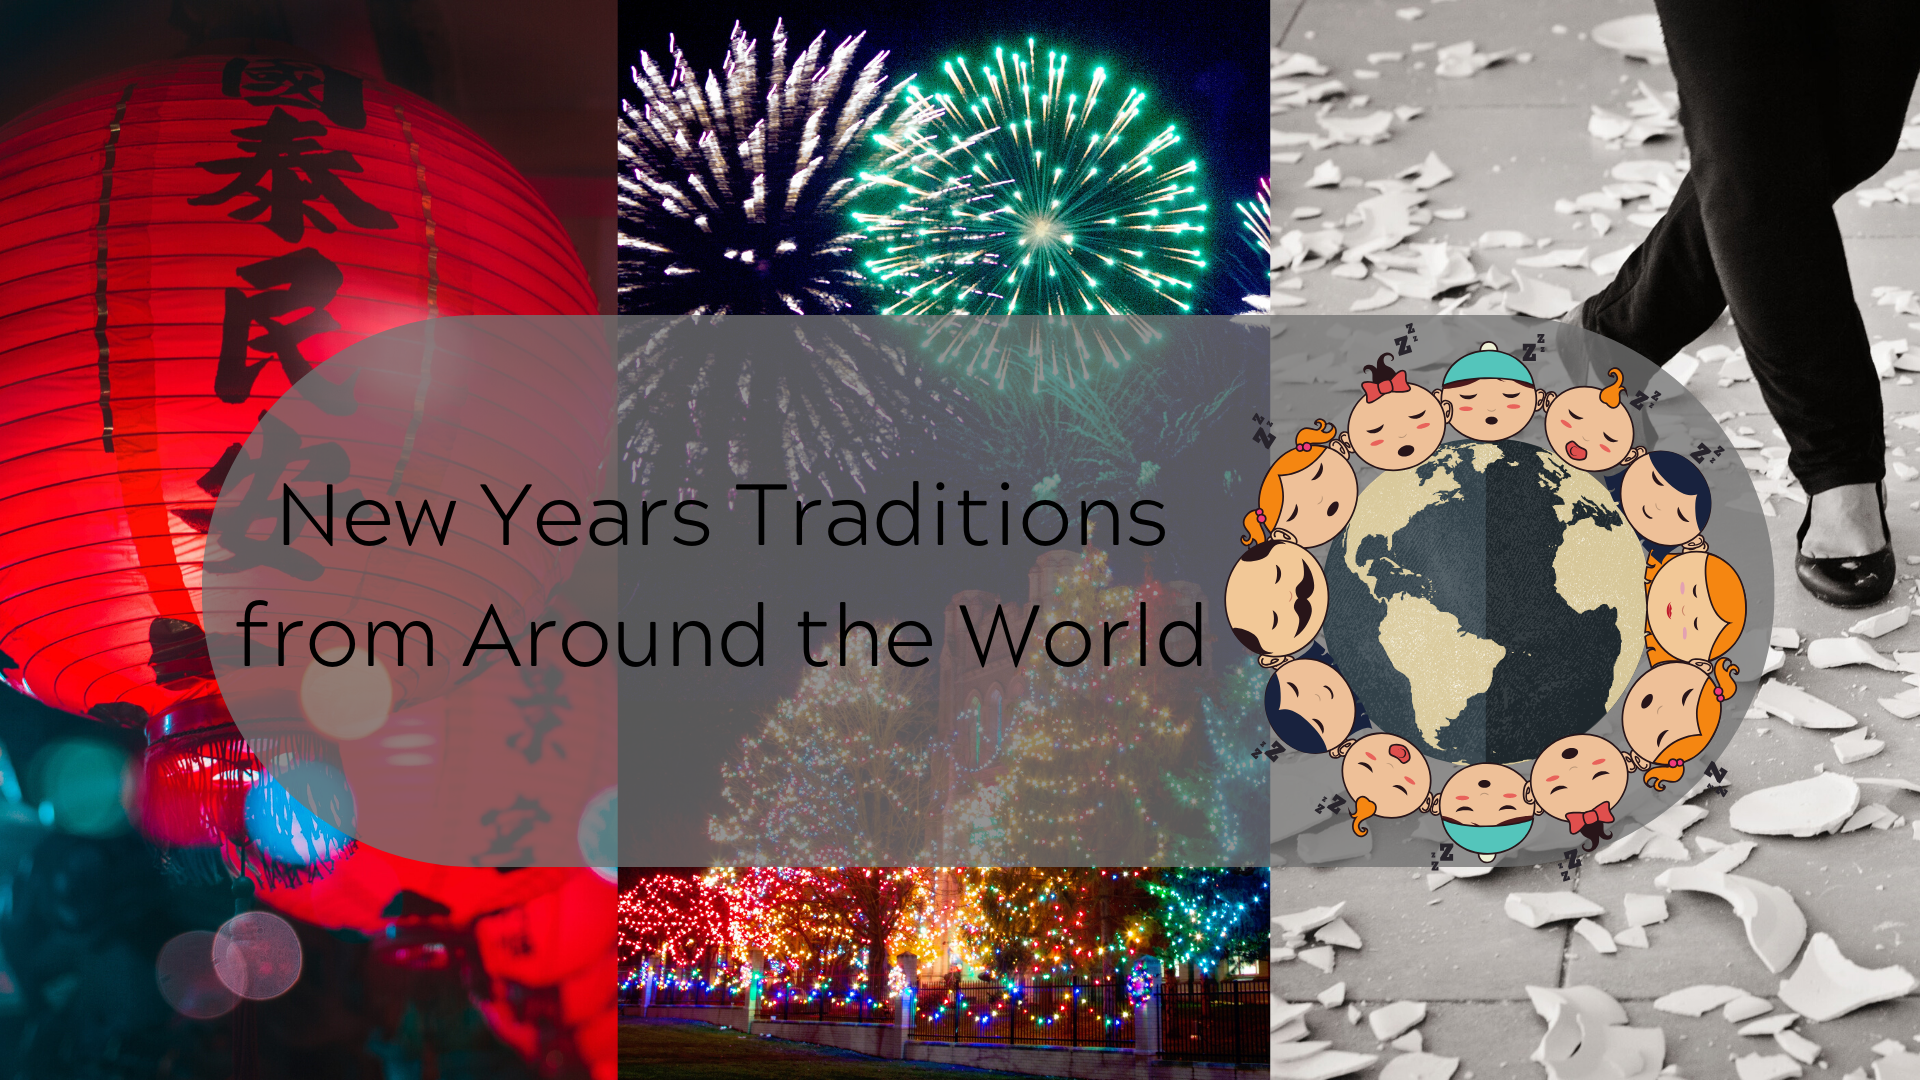 New|years|traditions|from|around|the|world|culture|madison|wisconsin|customs|eve